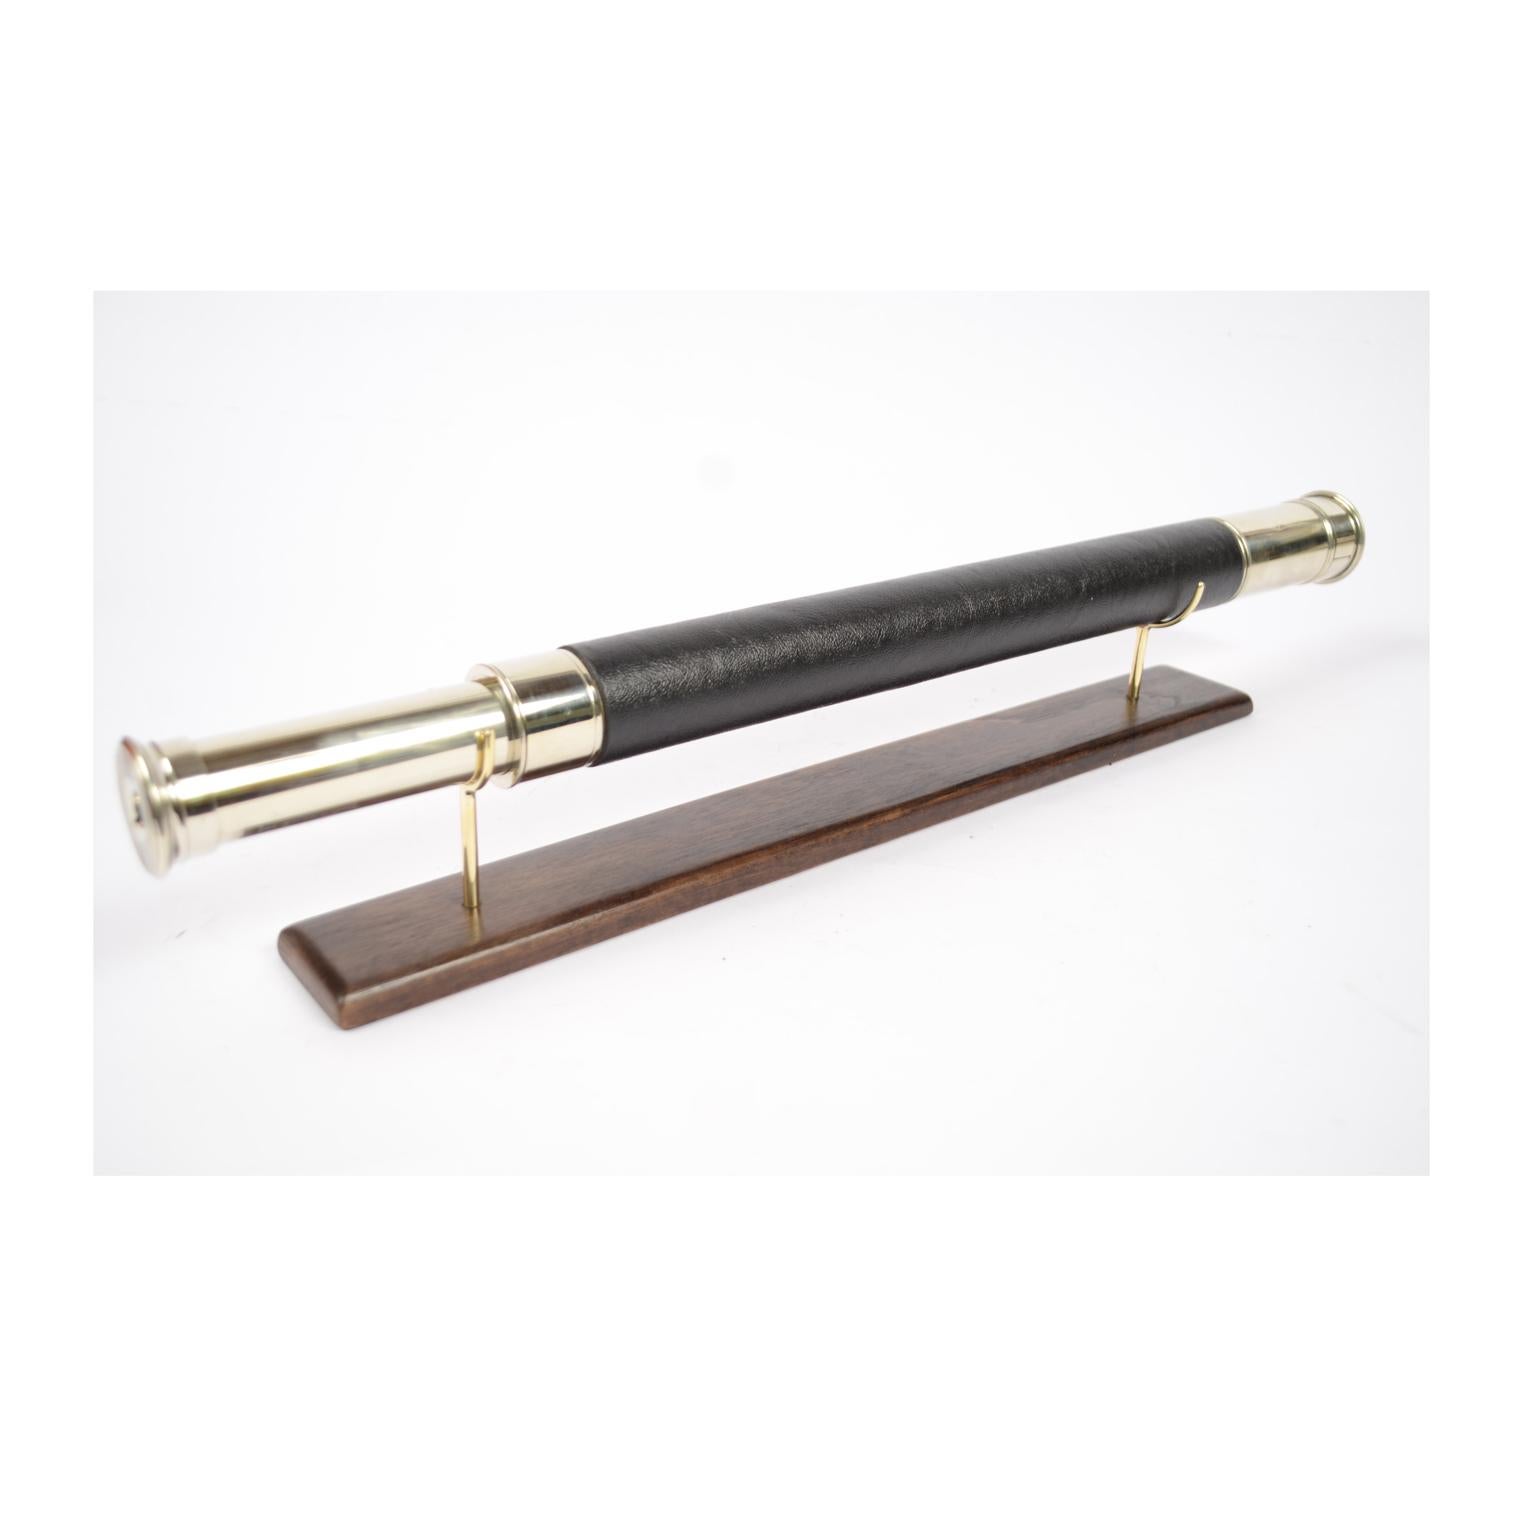 Brass telescope with leather-covered handle, signed Ross London of the second half of the 19th century; the parasol extension is engraved with the name of the owner Walter Path, focusing with one extension, complete with a dust-proof tongue and a